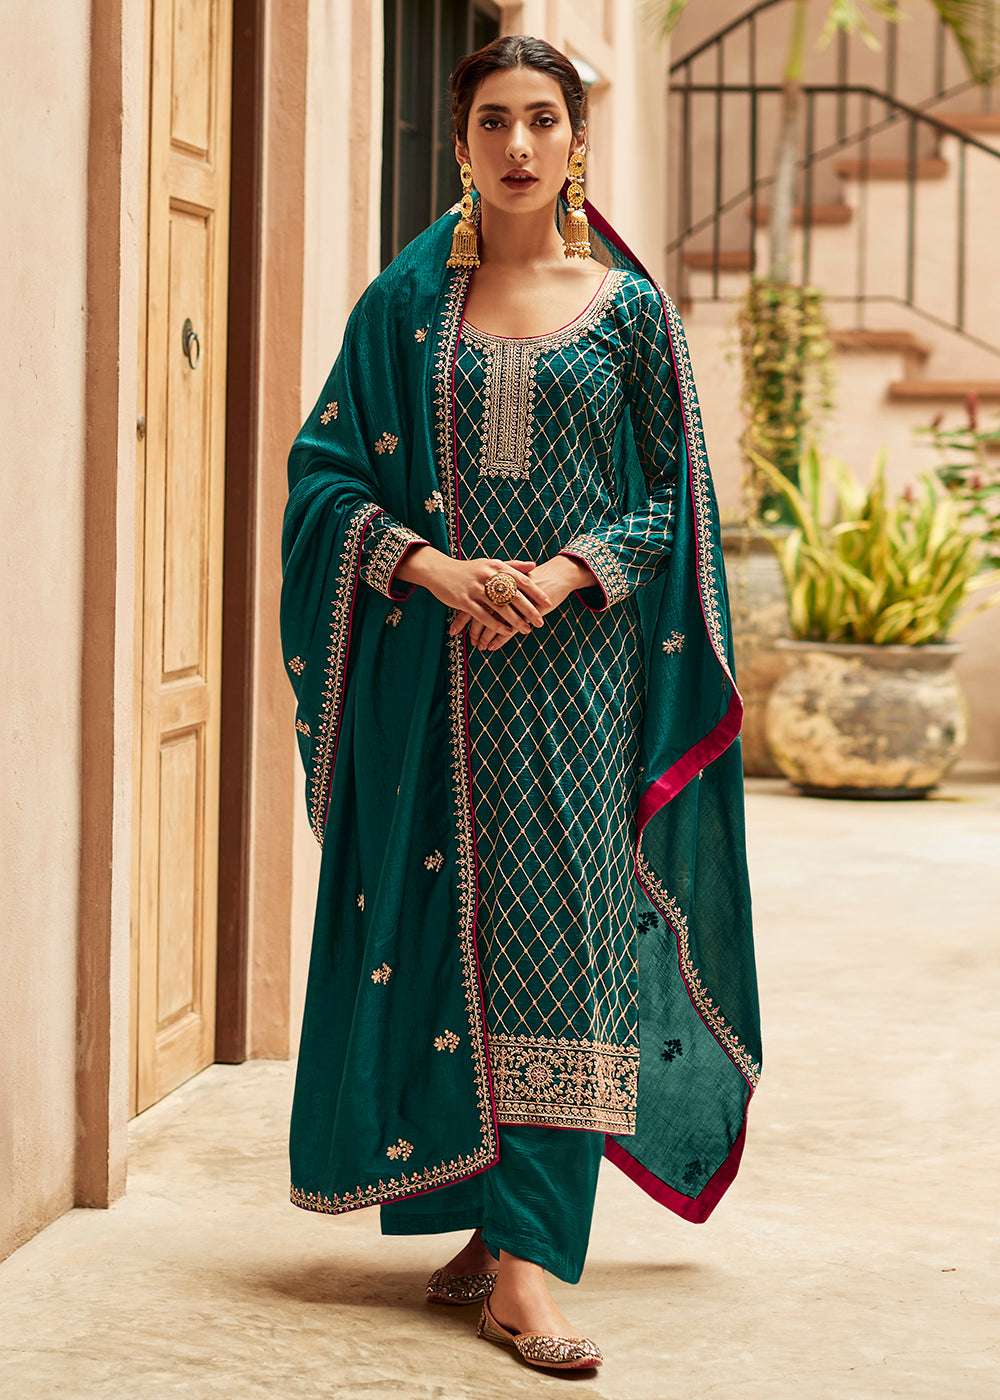 Buy Now Premium Silk Teal & Gold Embroidered Indian Salwar Kameez Online in USA, UK, Canada & Worldwide at Empress Clothing.